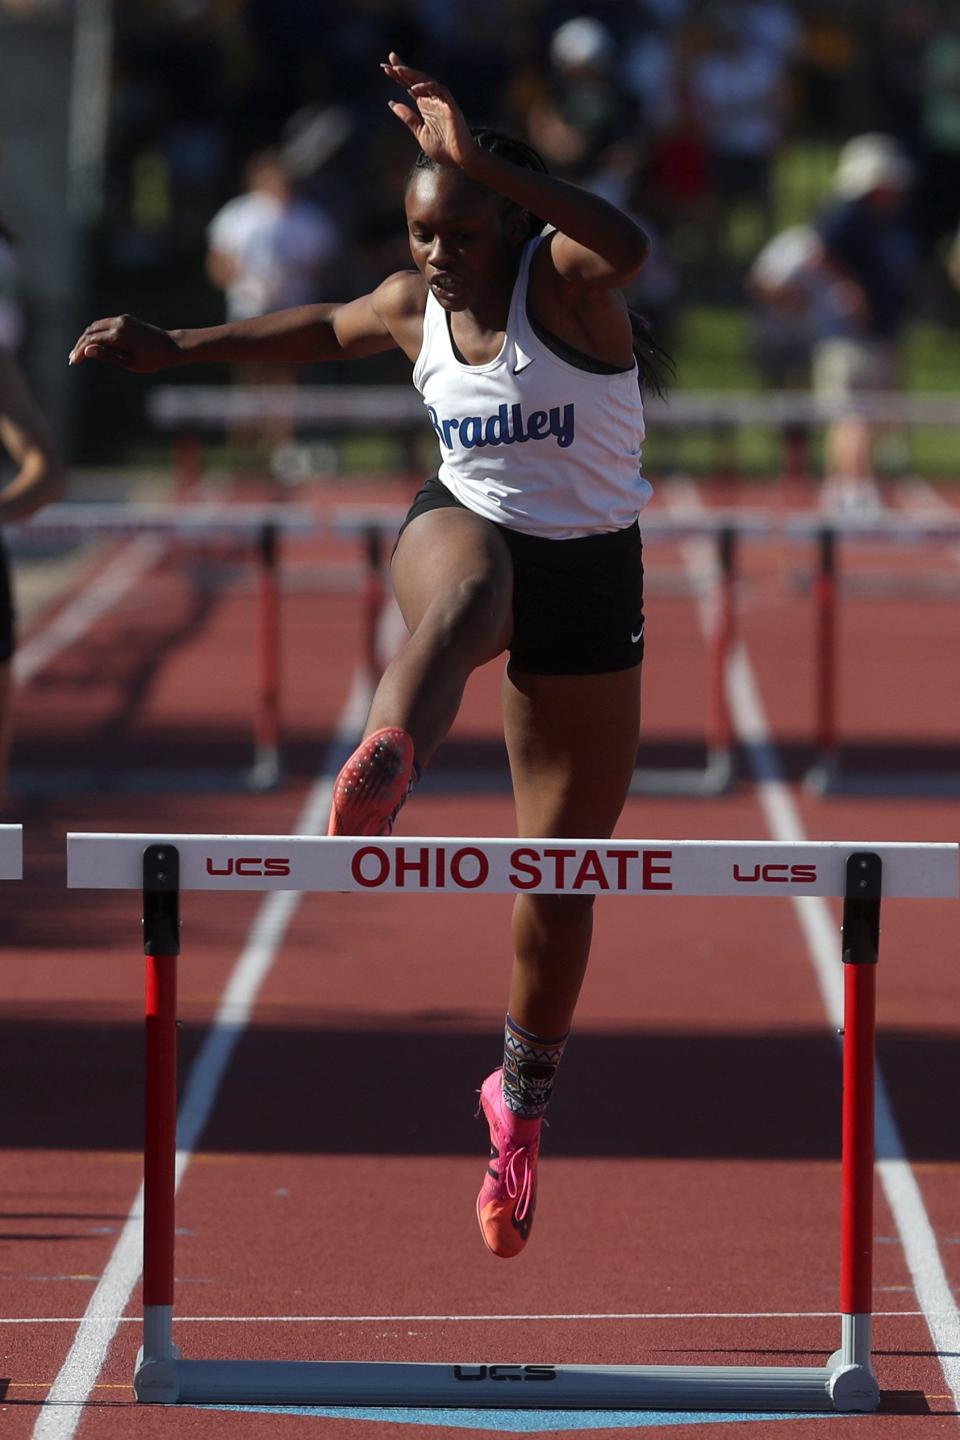 Bradley senior Gracelyn Peebles finished sixth in the 300 hurdles in the Division I state meet. “I’ve been beyond the moon over this entire experience,” she said.